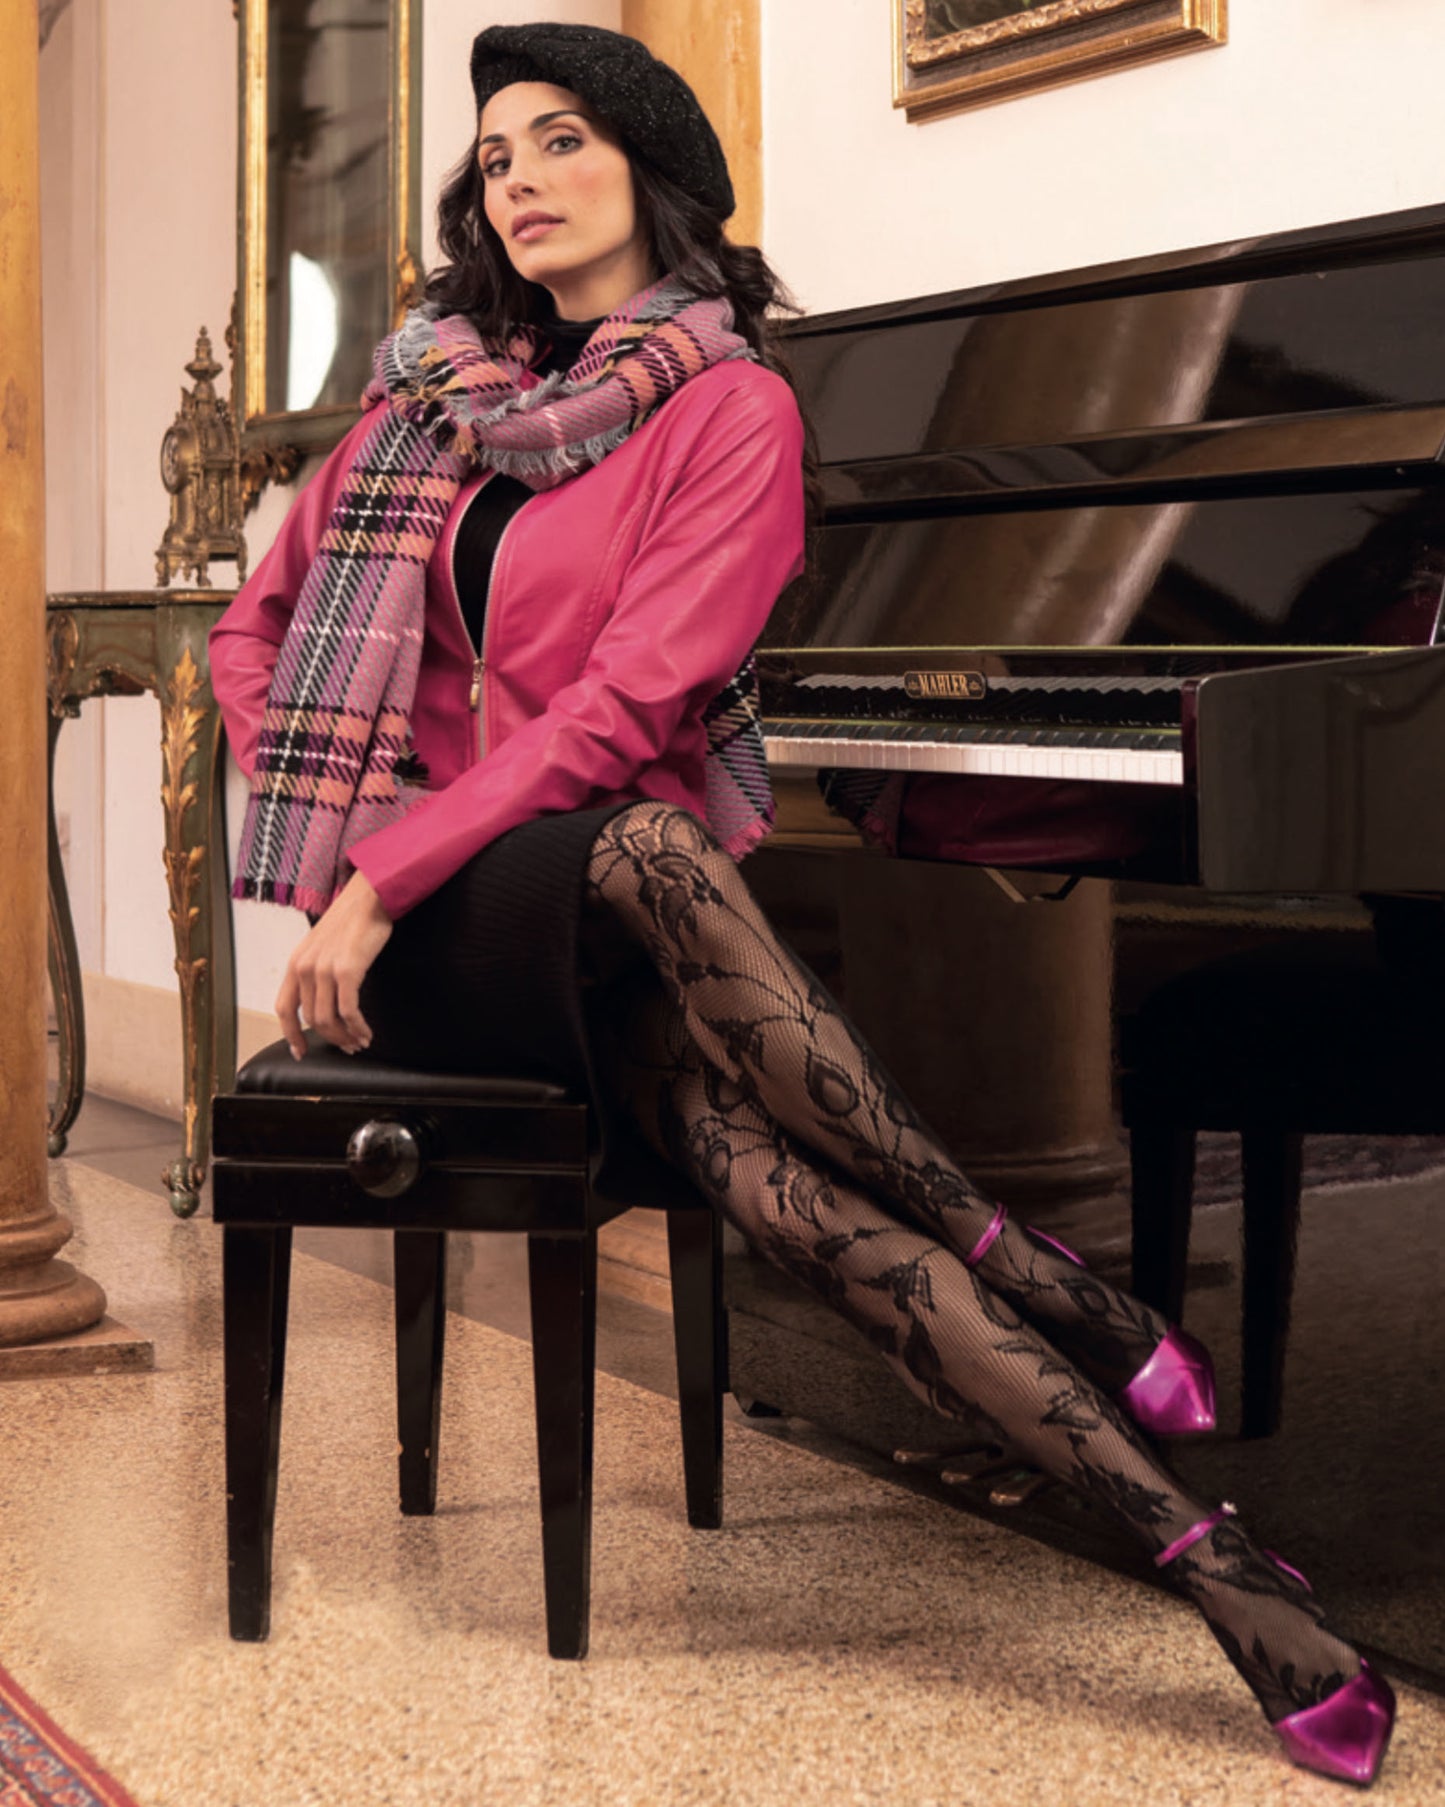 Omero Waterlily Collant - Black openwork fashion tights with a floral leaf lace style pattern, worn with pink shoes and jacket and tartan scarf.